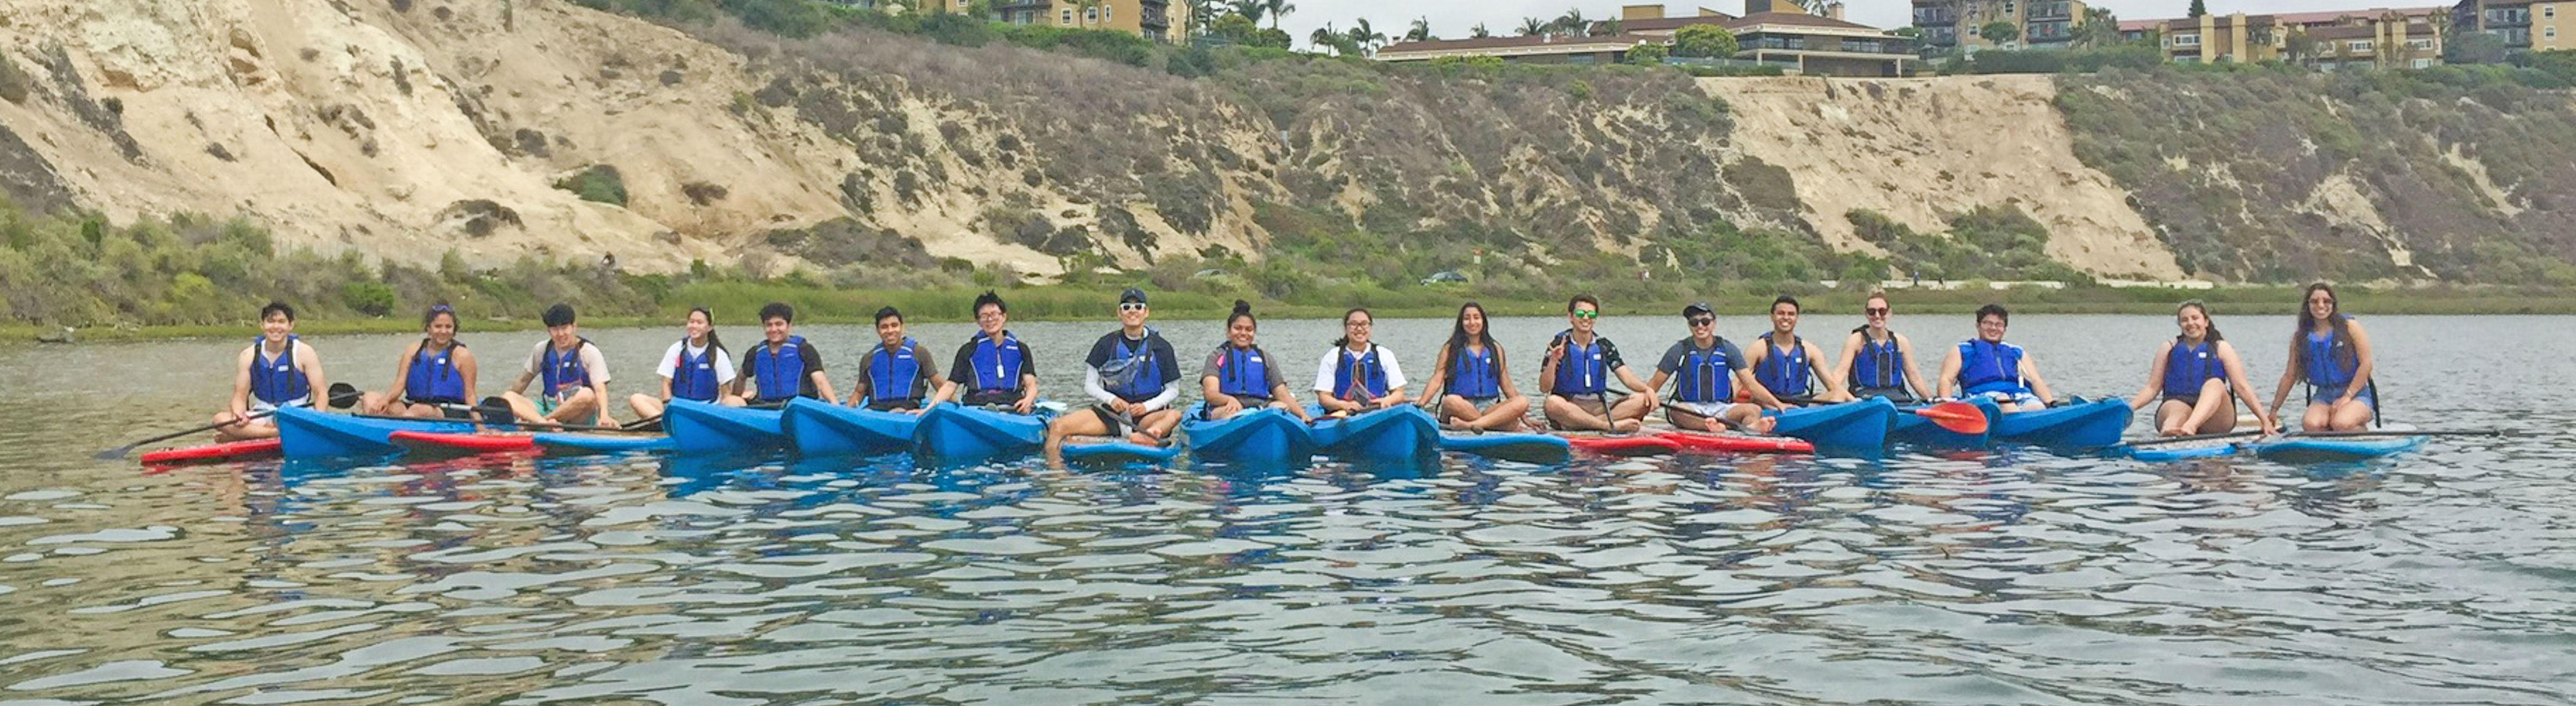 UCI Campus Recreation - Kayaking Picture